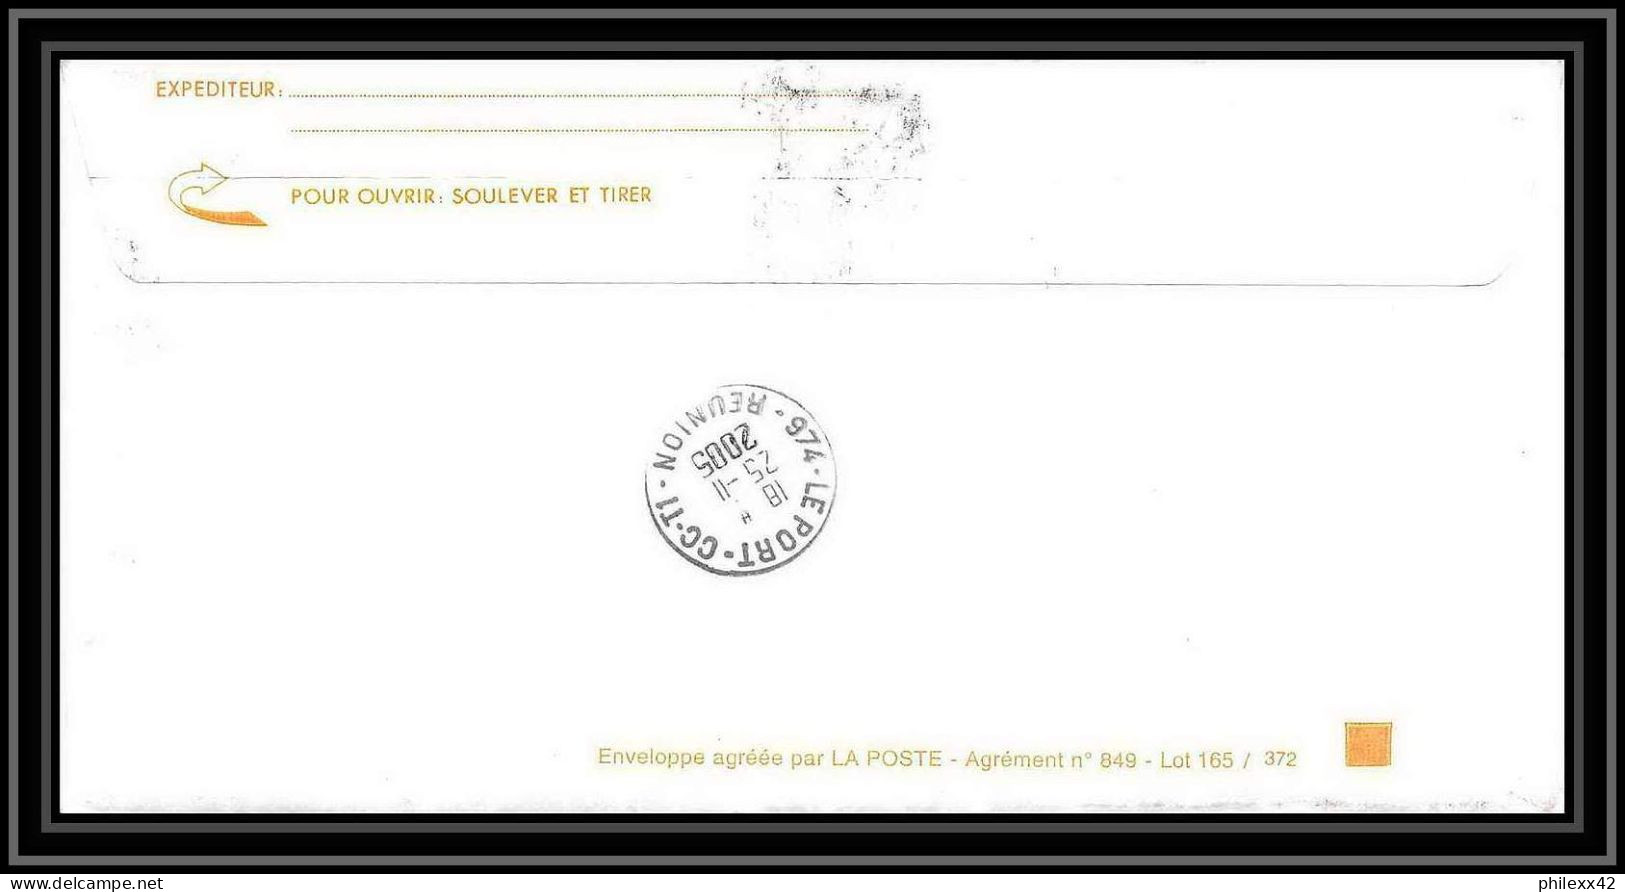 2531 ANTARCTIC ILES MAURICE -Lettre Cover Dufresne 2 Signé Signed 25/11/2005 - Antarktis-Expeditionen